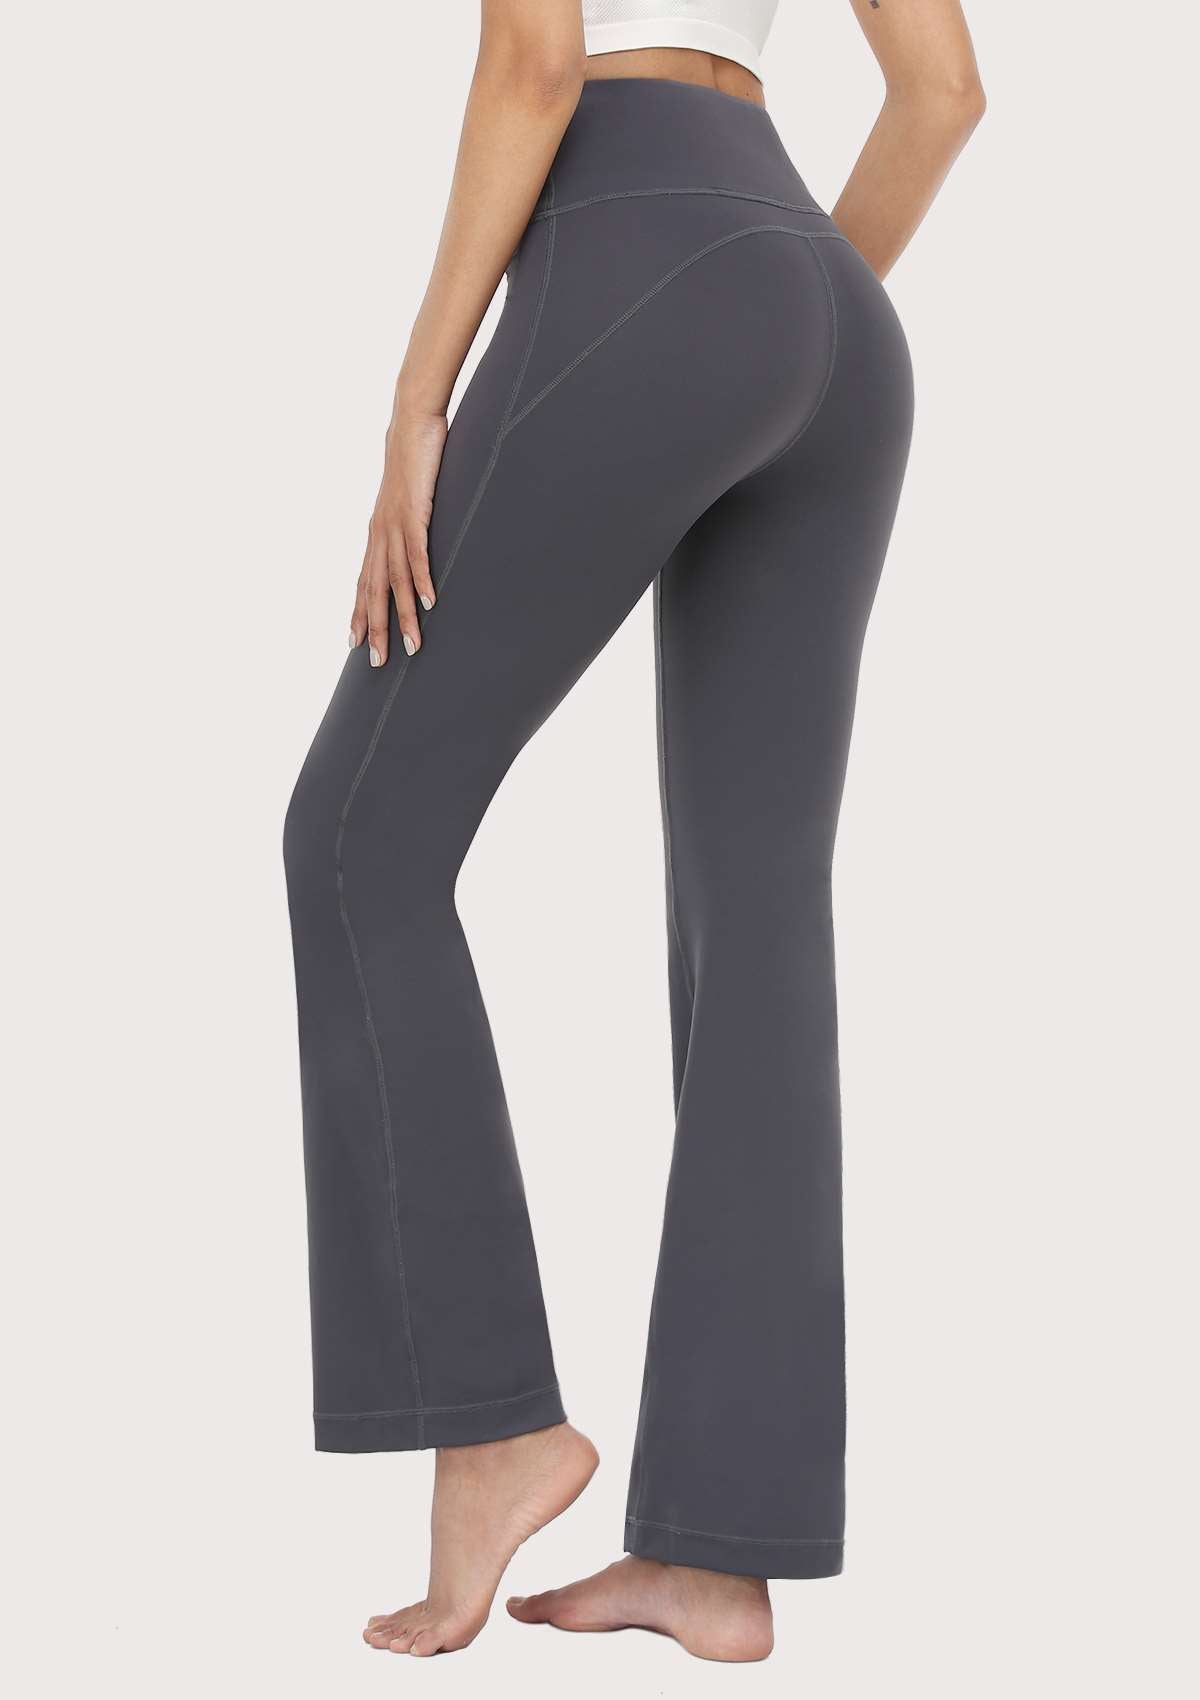 SONGFUL Smooth High Waisted Bootcut Yoga Sports Pants - XL / Dark Grey